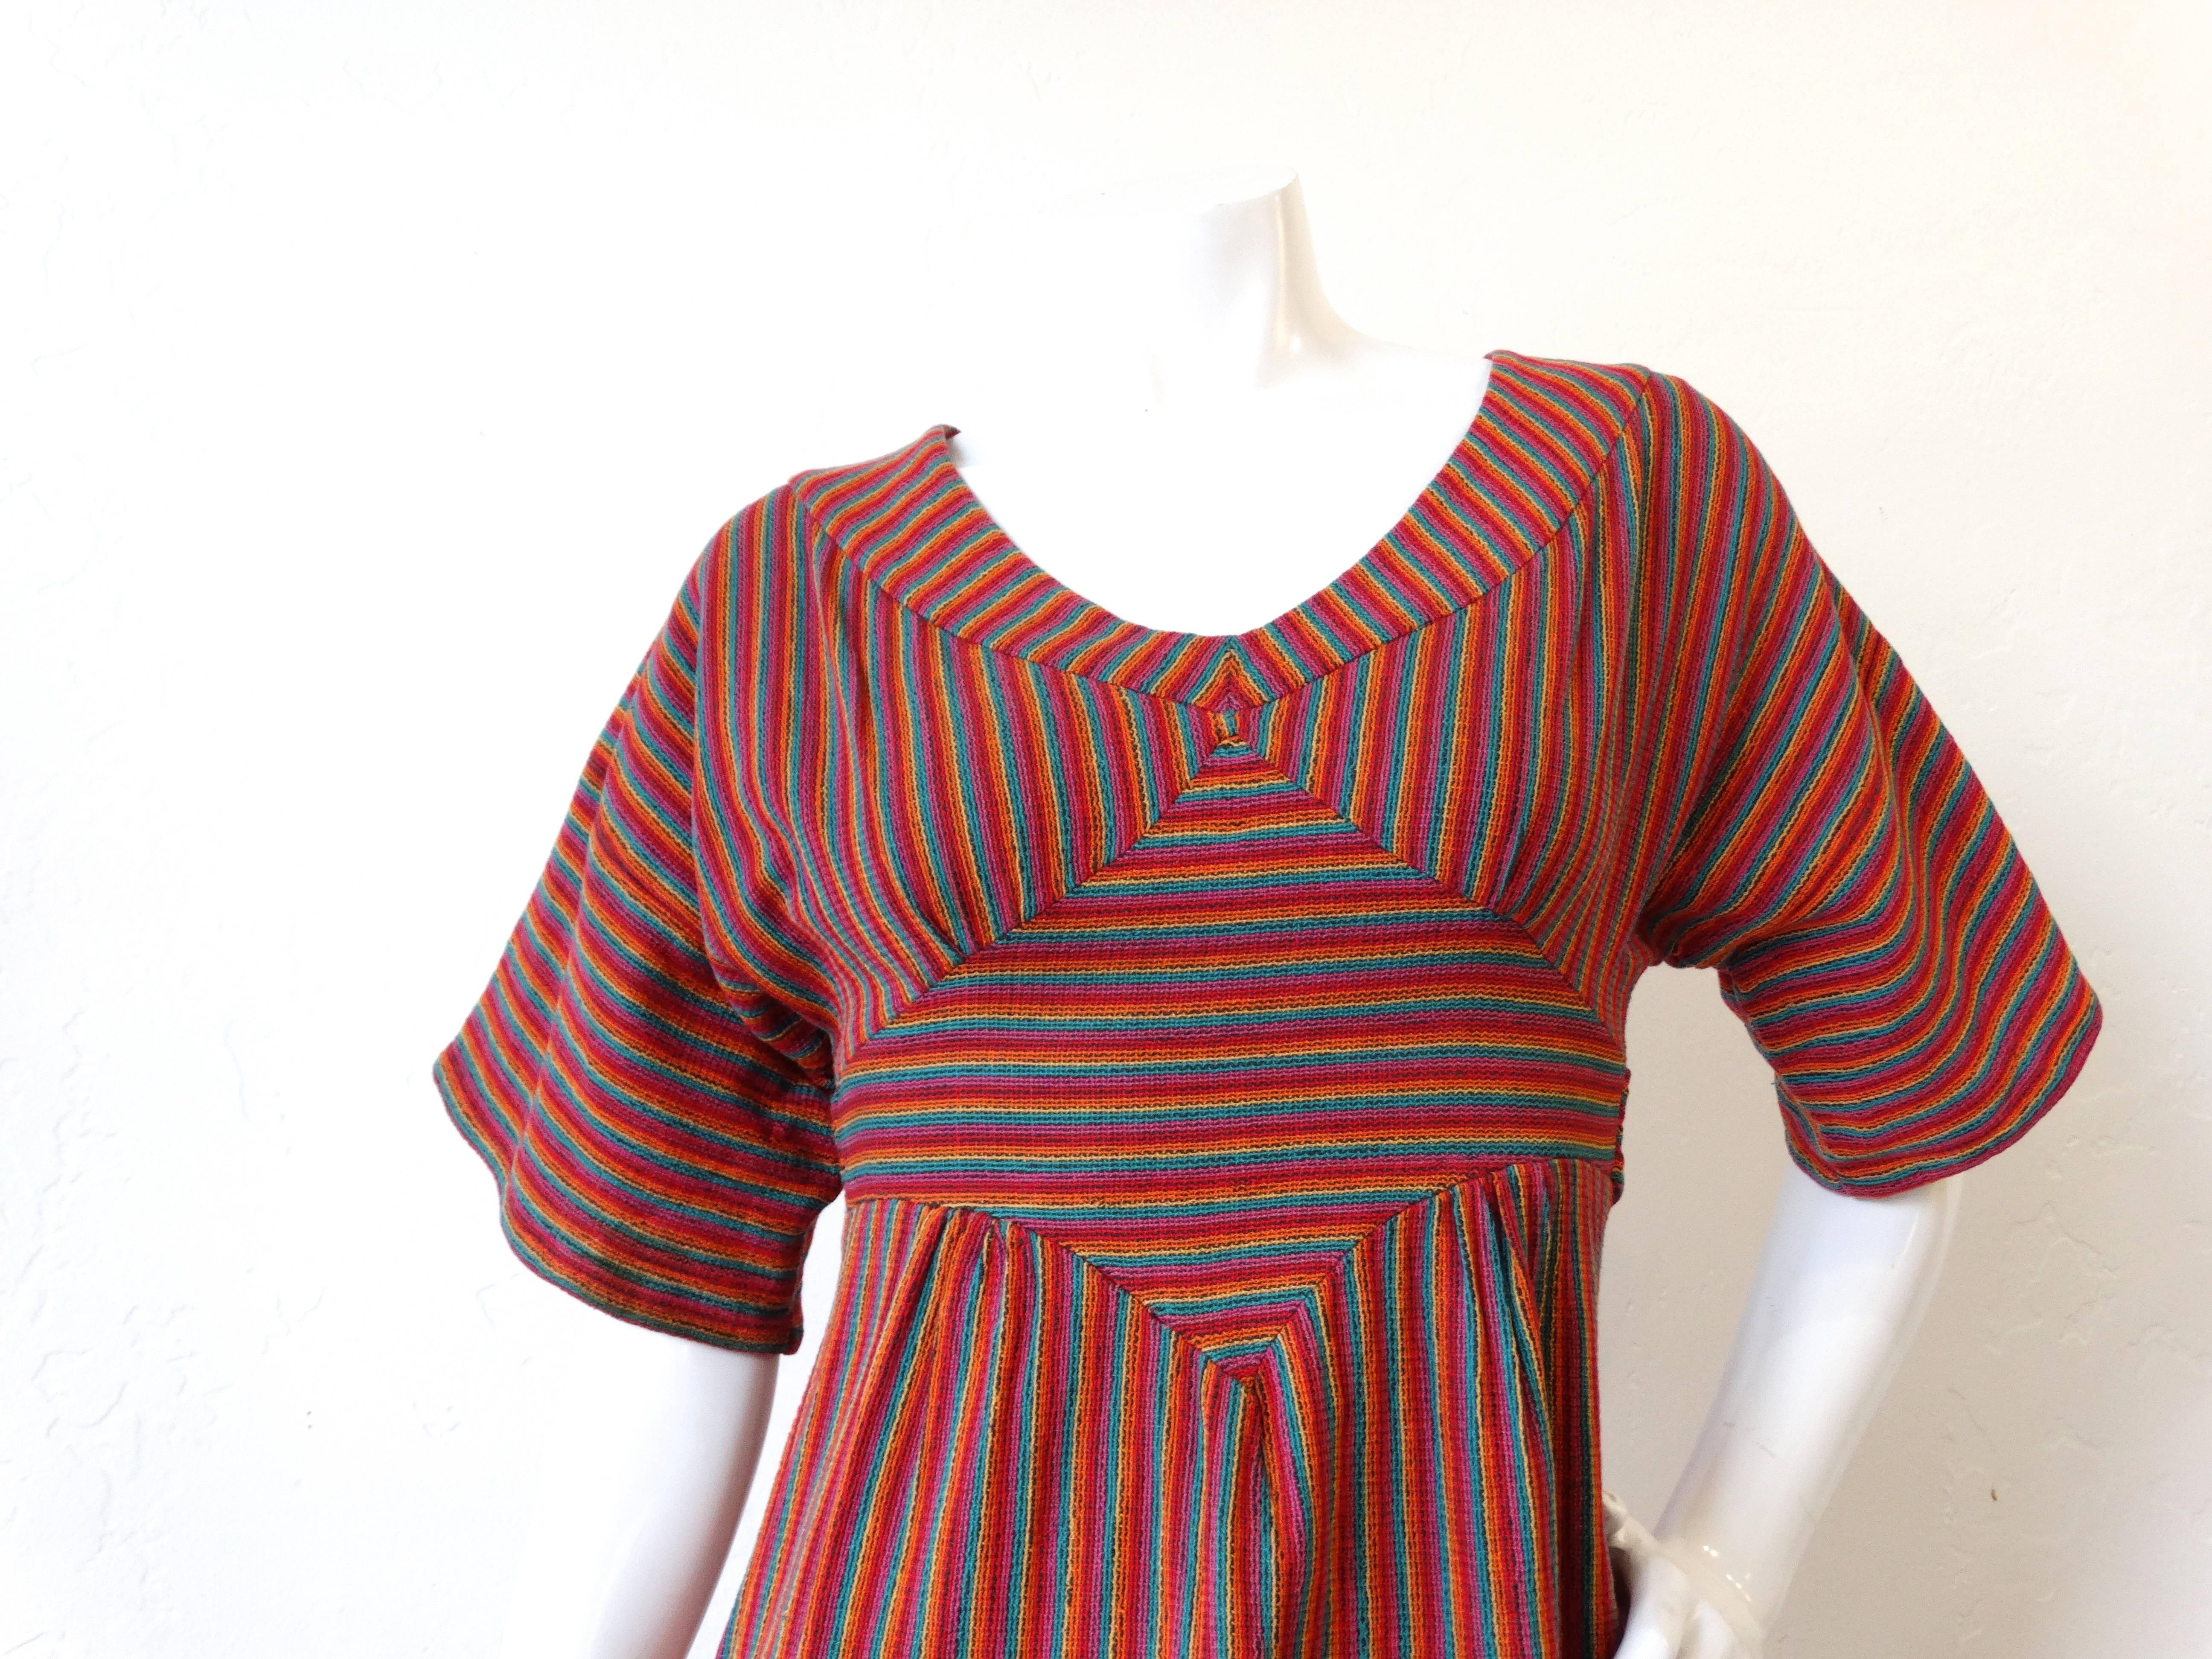 This is a fabulous dress from the 1970's  marked a size Medium, Made in Israel designed by one of my favorite middle eastern designers Rikma! Woven cotton with bright beautiful colors and patterns makes this dress a bohemians girls dream! Fits slim